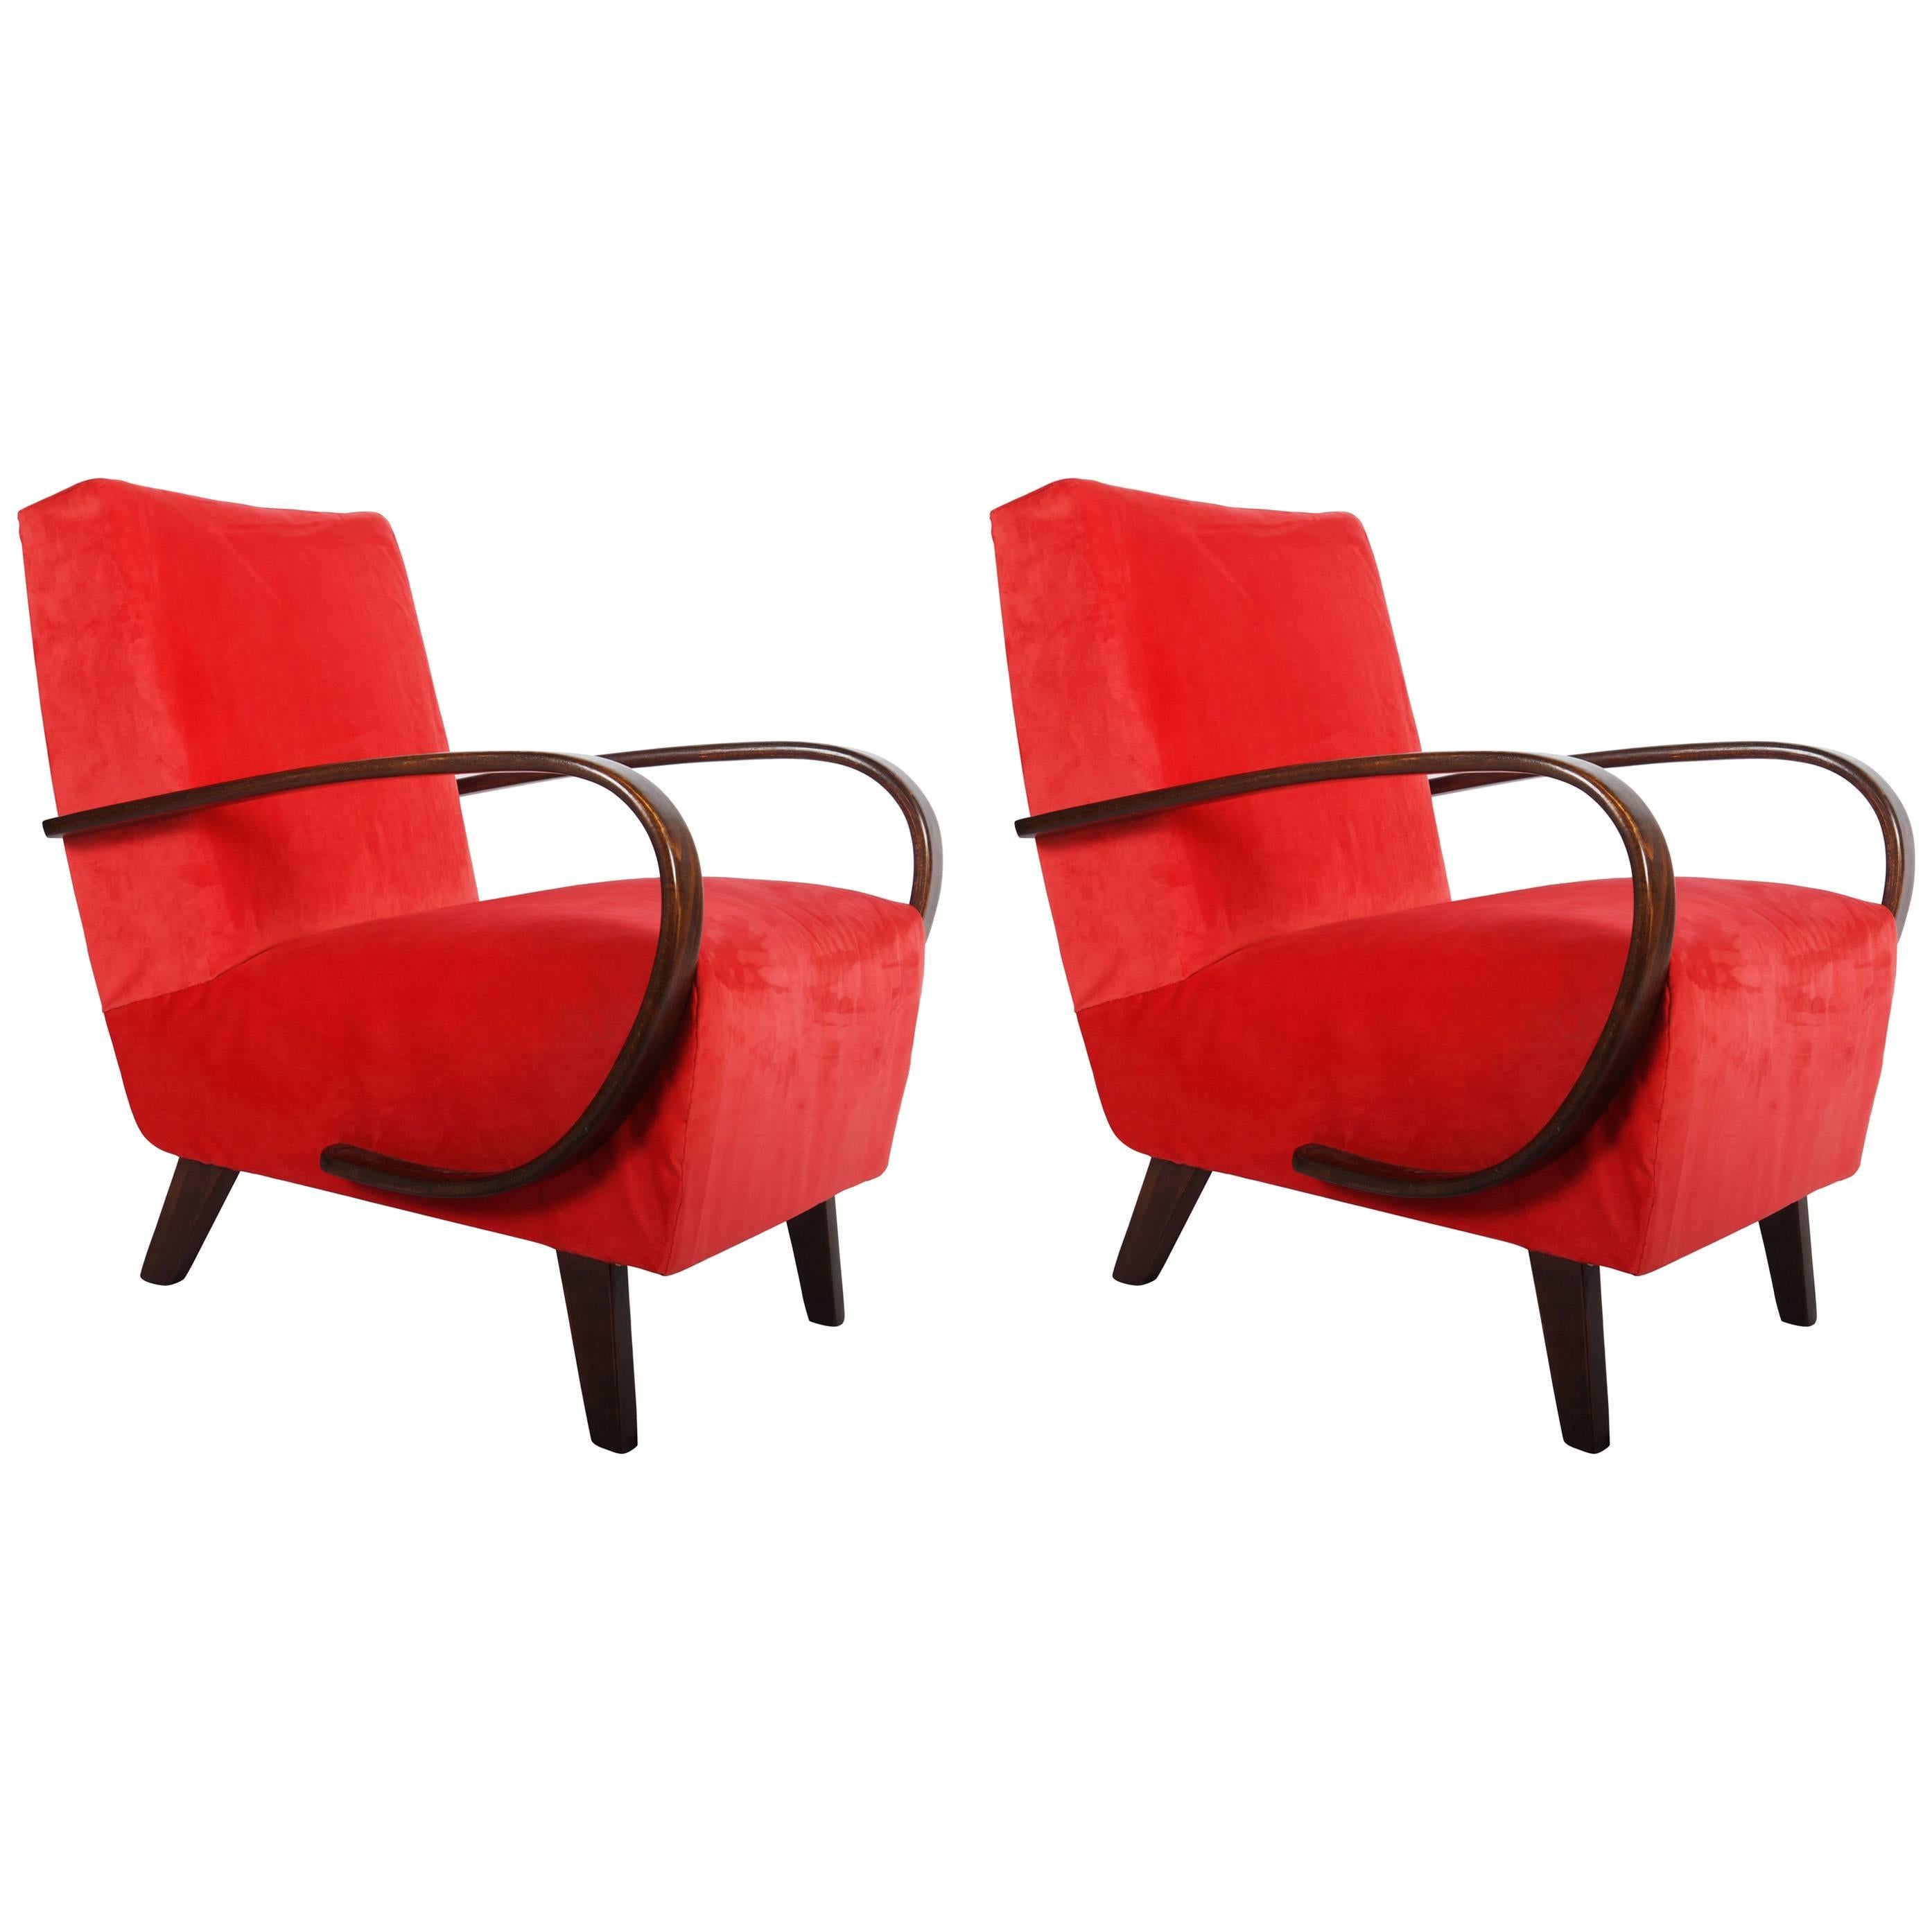 Pair of Midcentury Armchairs by Jindrich Halabala